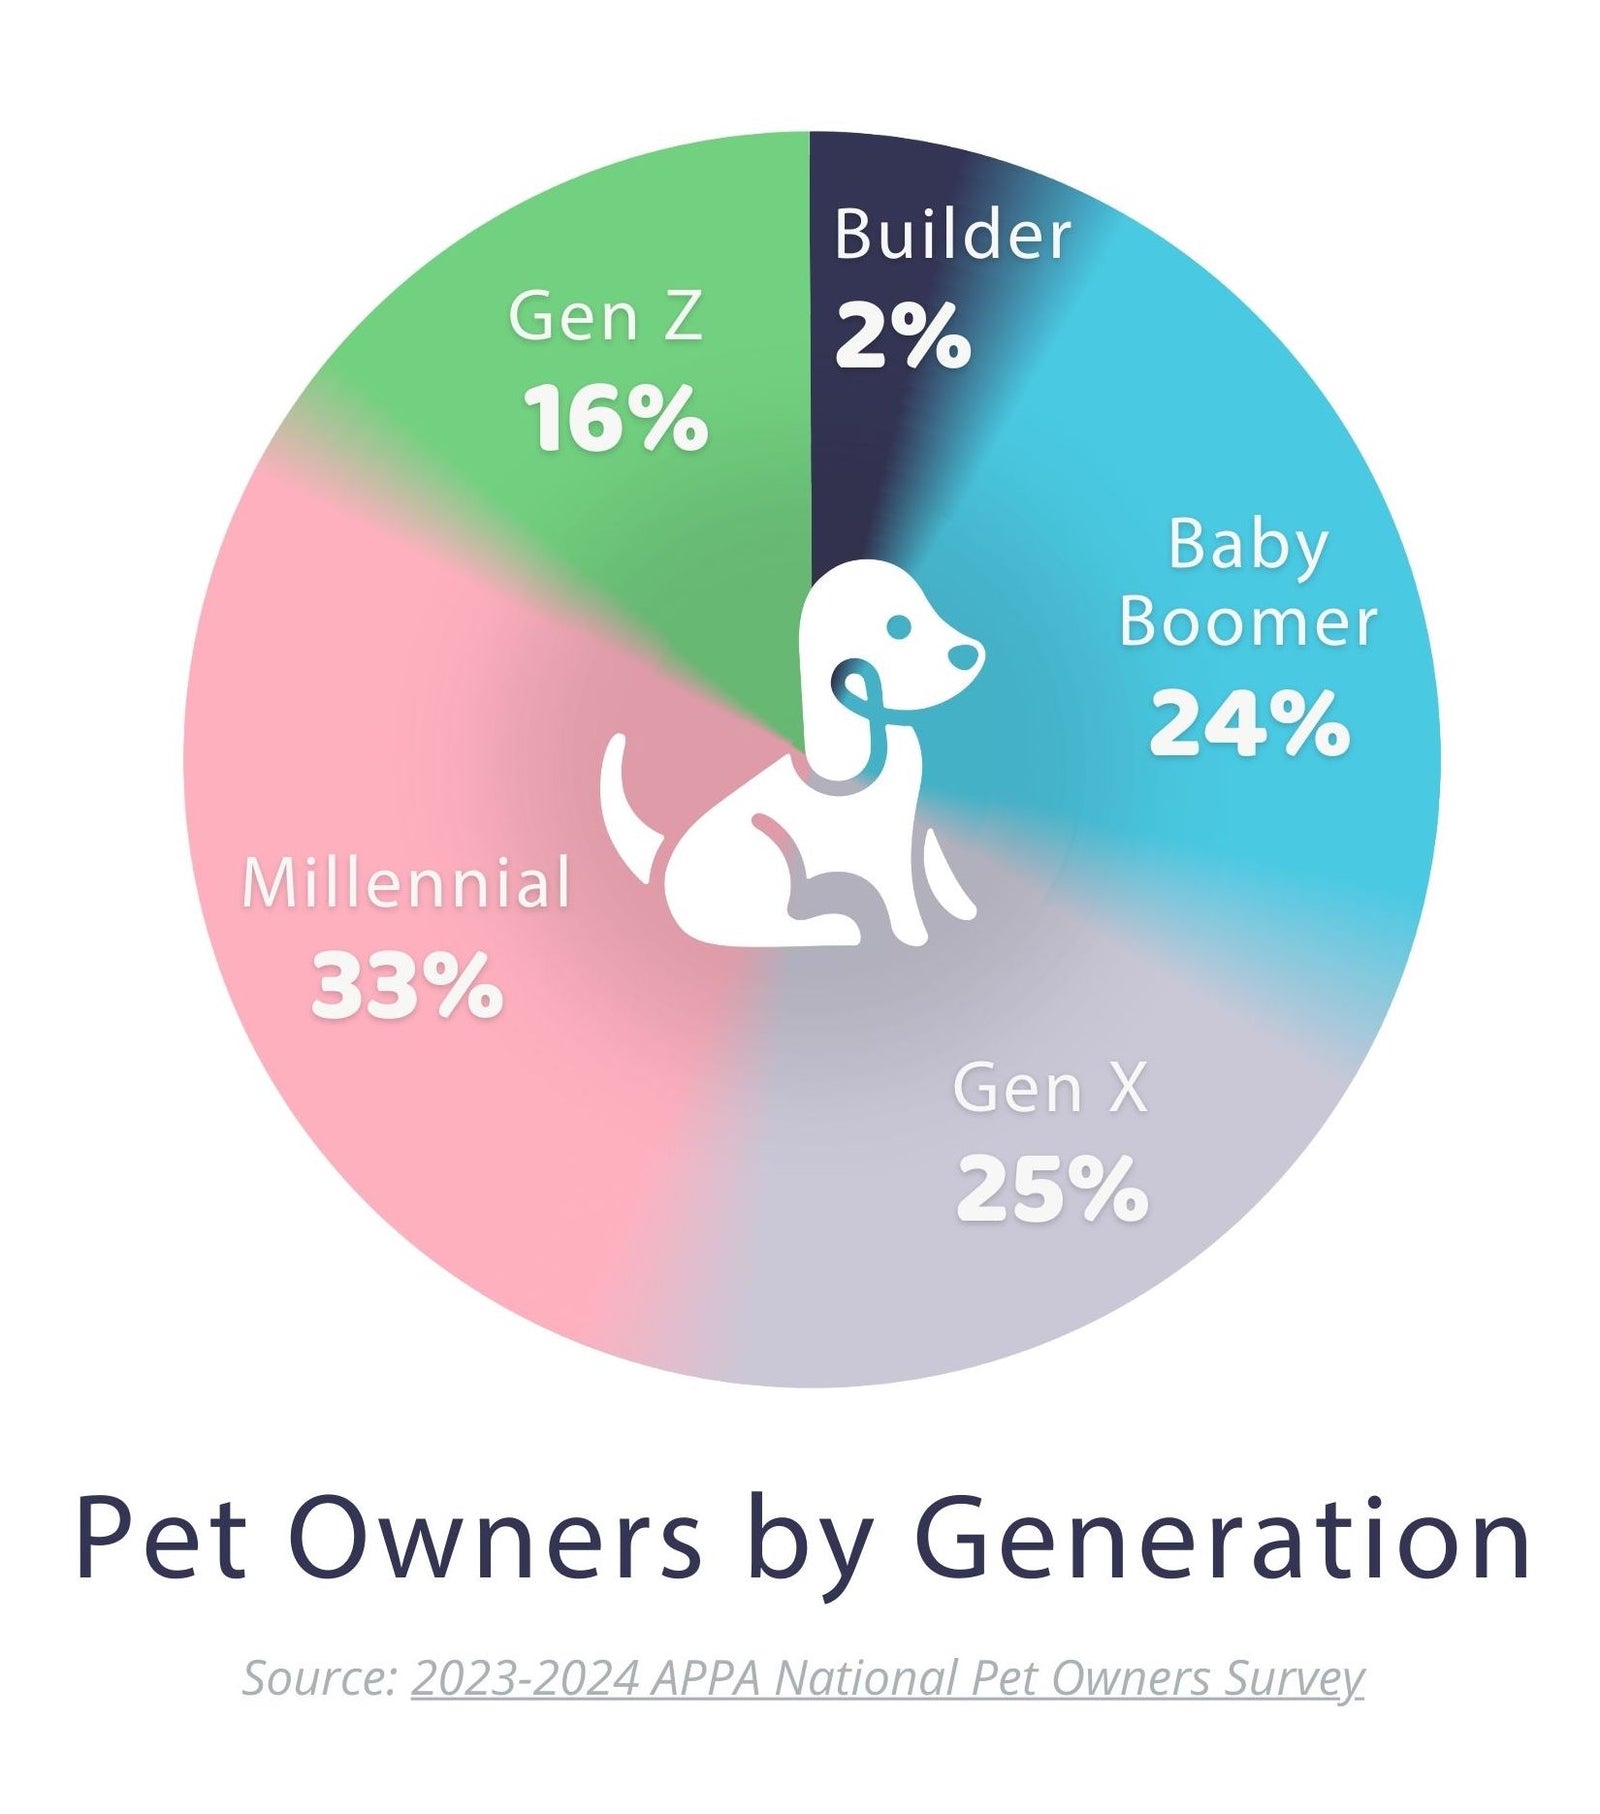 Millennials have the highest percent of pet ownership today at 32 percent, and Gen Z's pet ownership is growing from 14% as they reach adulthood.